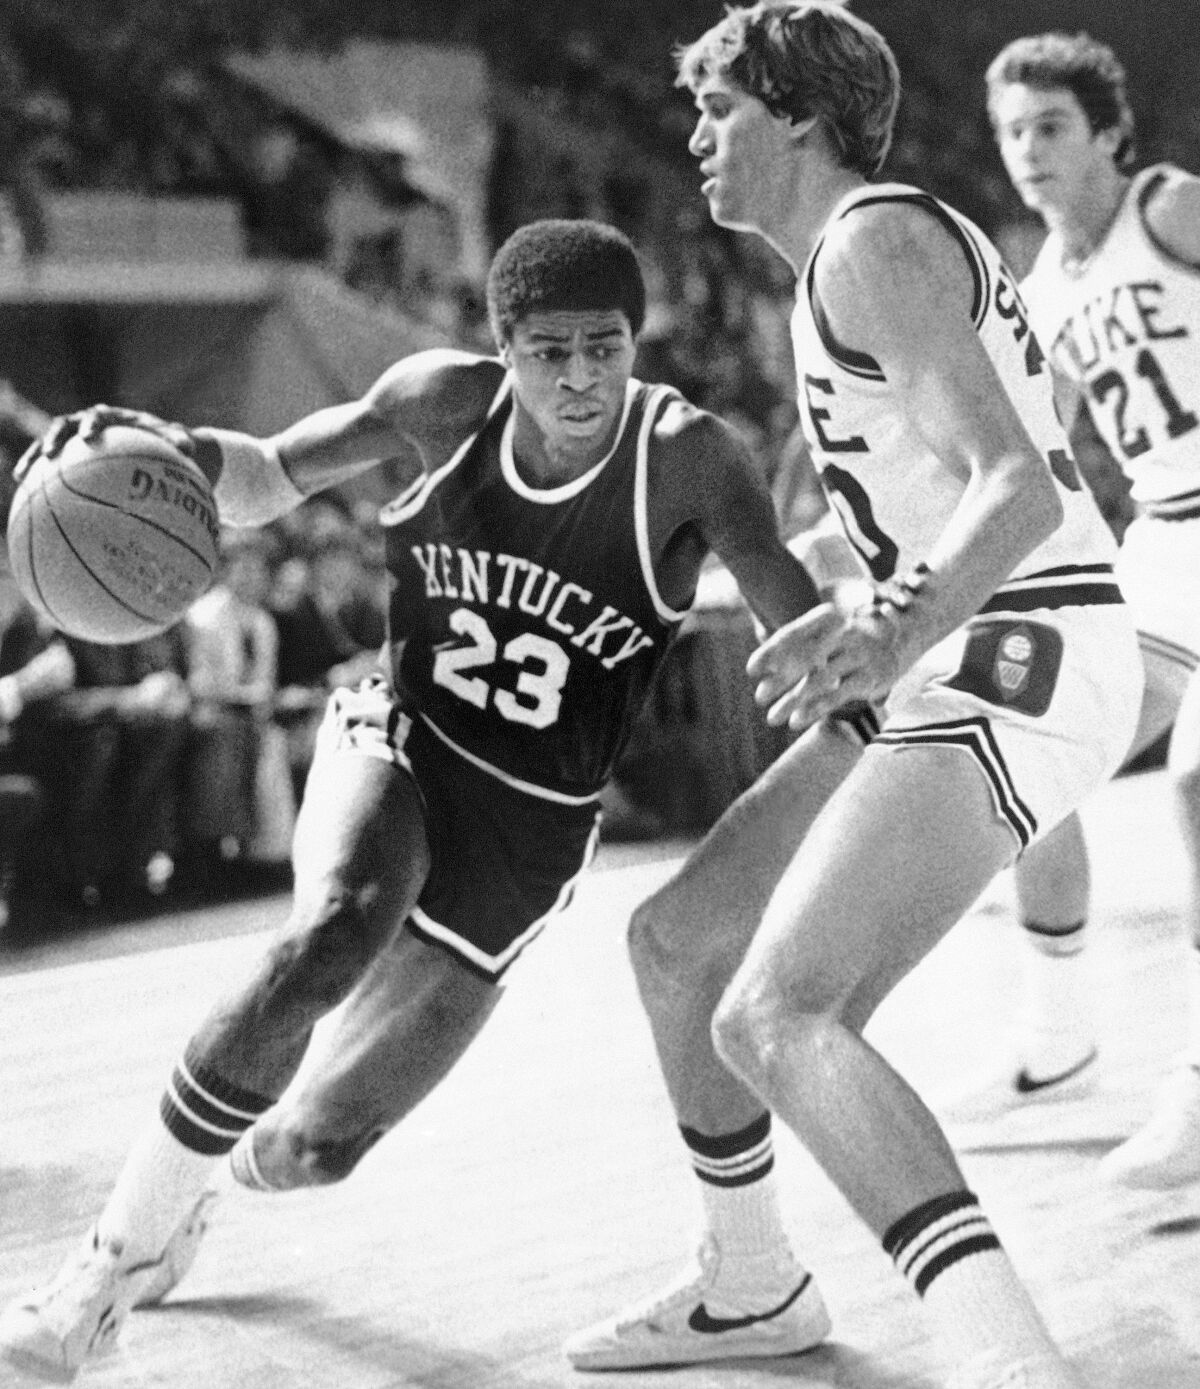 FILE - University of Kentucky's Dwight Anderson drives past Duke University's Jim Suddath during the first half of an NCAA college basketball game in Springfield, Mass., Nov. 17, 1979. Dwight Anderson, who earned the nickname “The Blur" because of his speed on the court playing basketball at Kentucky and Southern California, has died. He was 59. Anderson died last Saturday, Sept. 5, 2020, in his hometown of Dayton, Ohio, according to USC. The cause was not immediately known.(AP Photo/Paul Benoit, File)